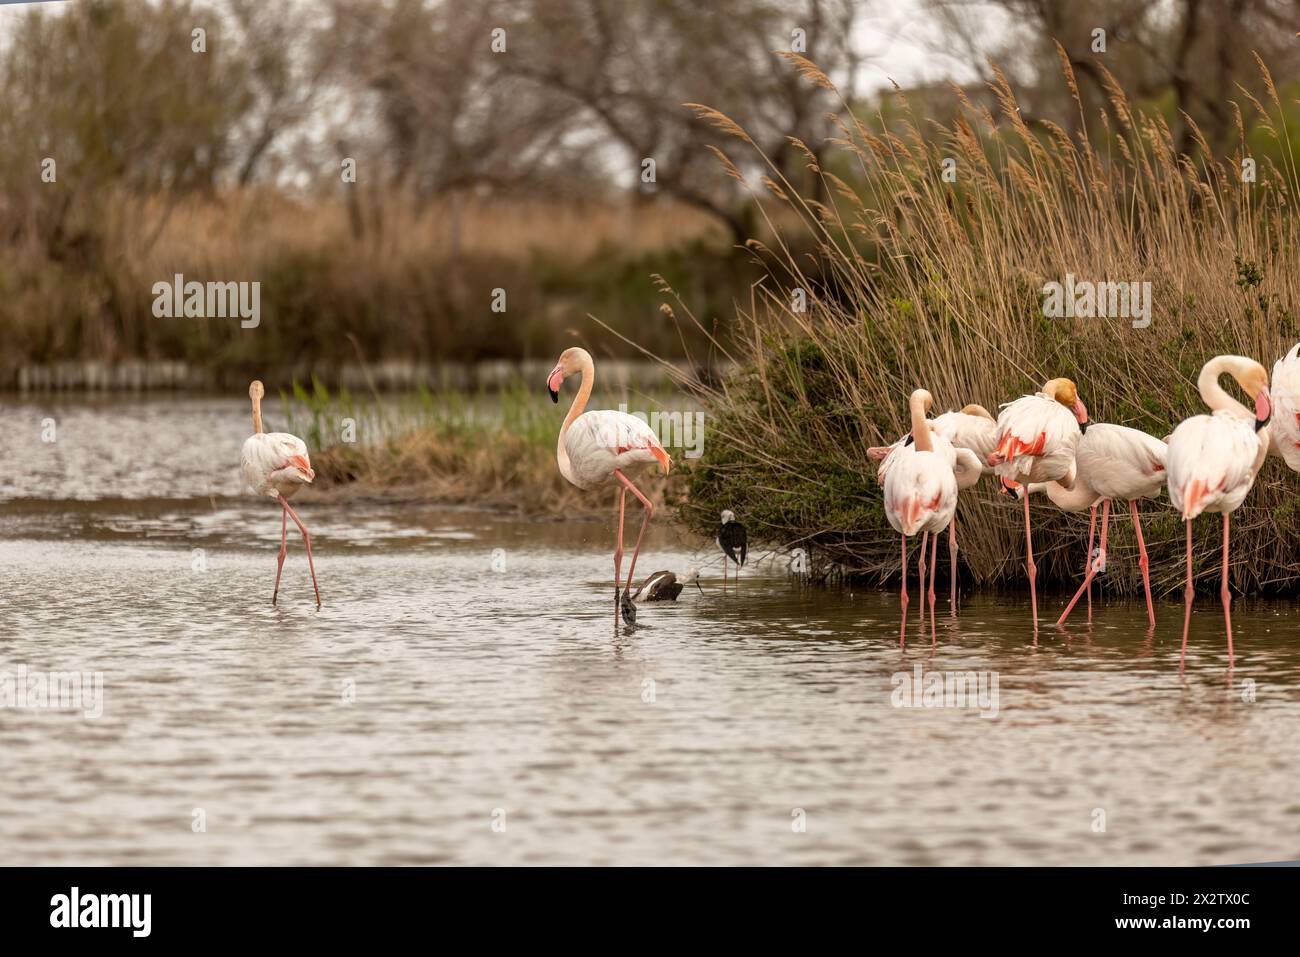 Wild flamingos (Phoenicopteridae) at the Camargue, france, europe in early spring outdoors. Wildlife birdwatching Stock Photo